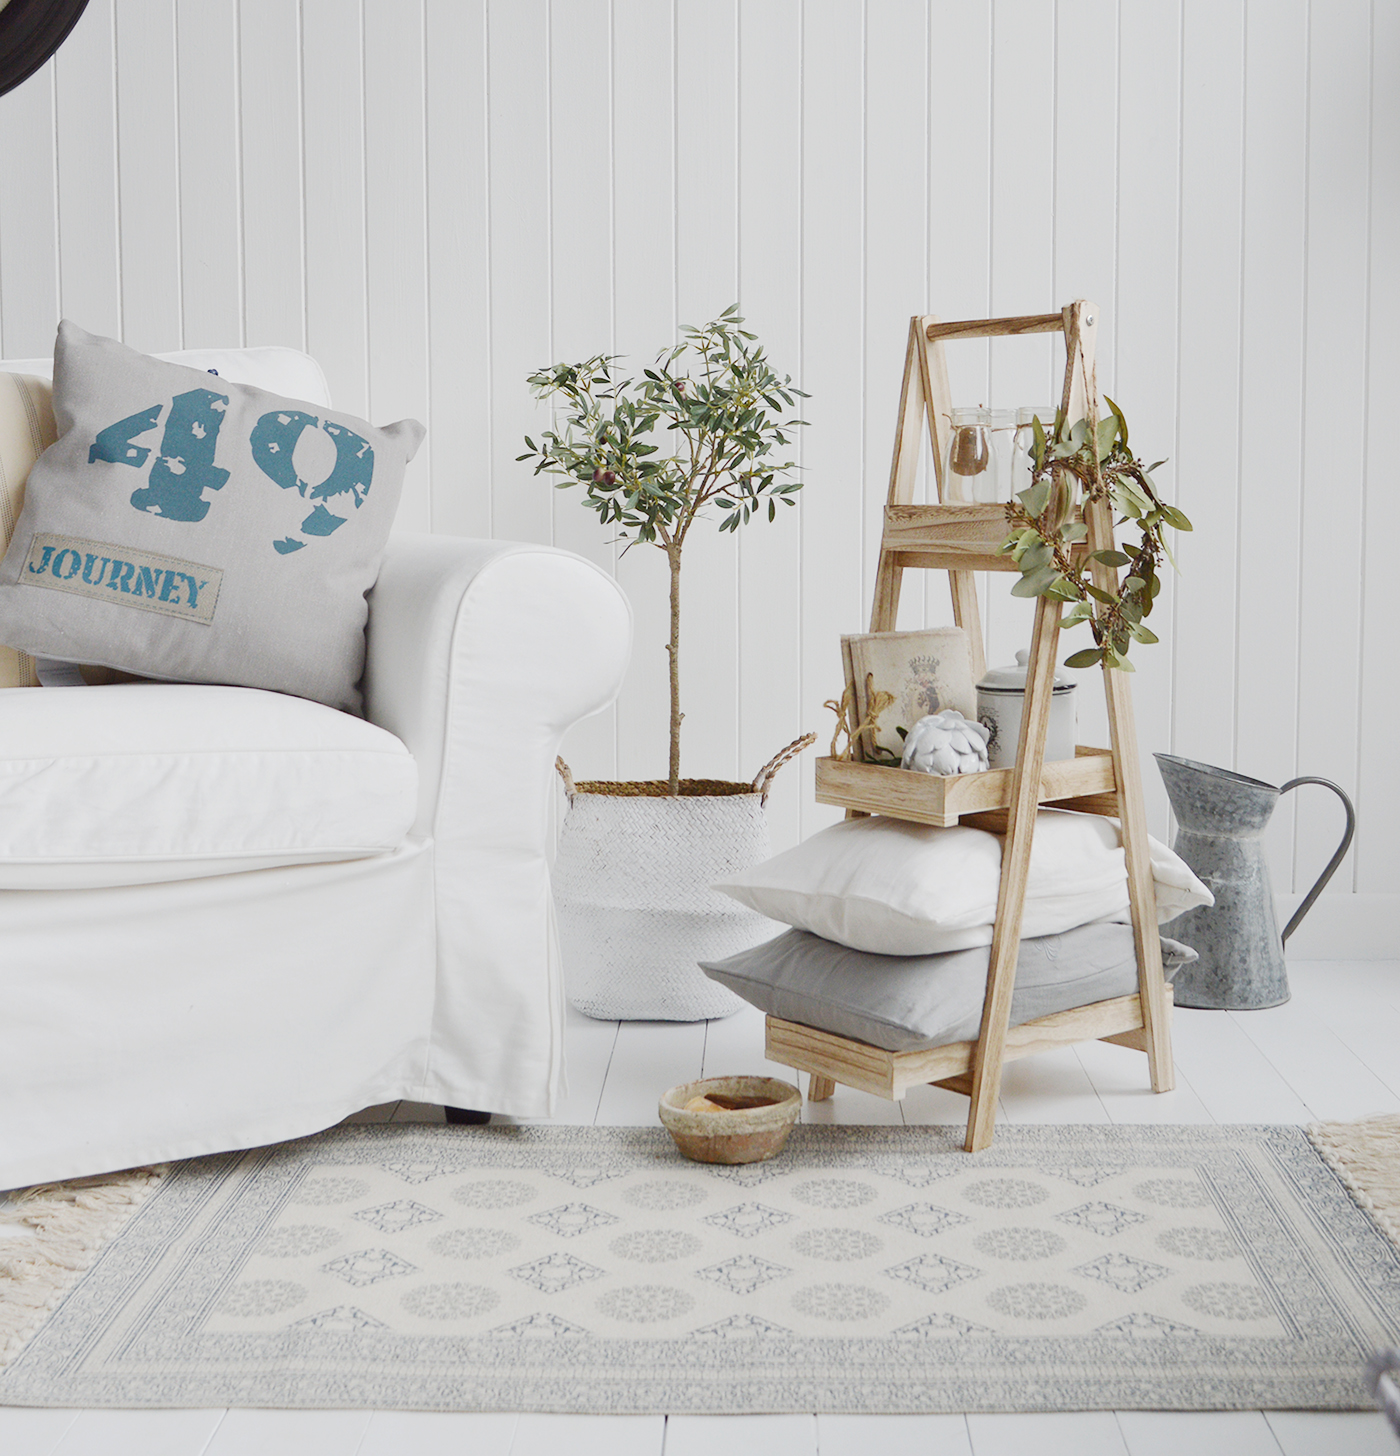 View our range of white living room furniture in New England, Coastal and Country style home interiors from The White Lighthouse